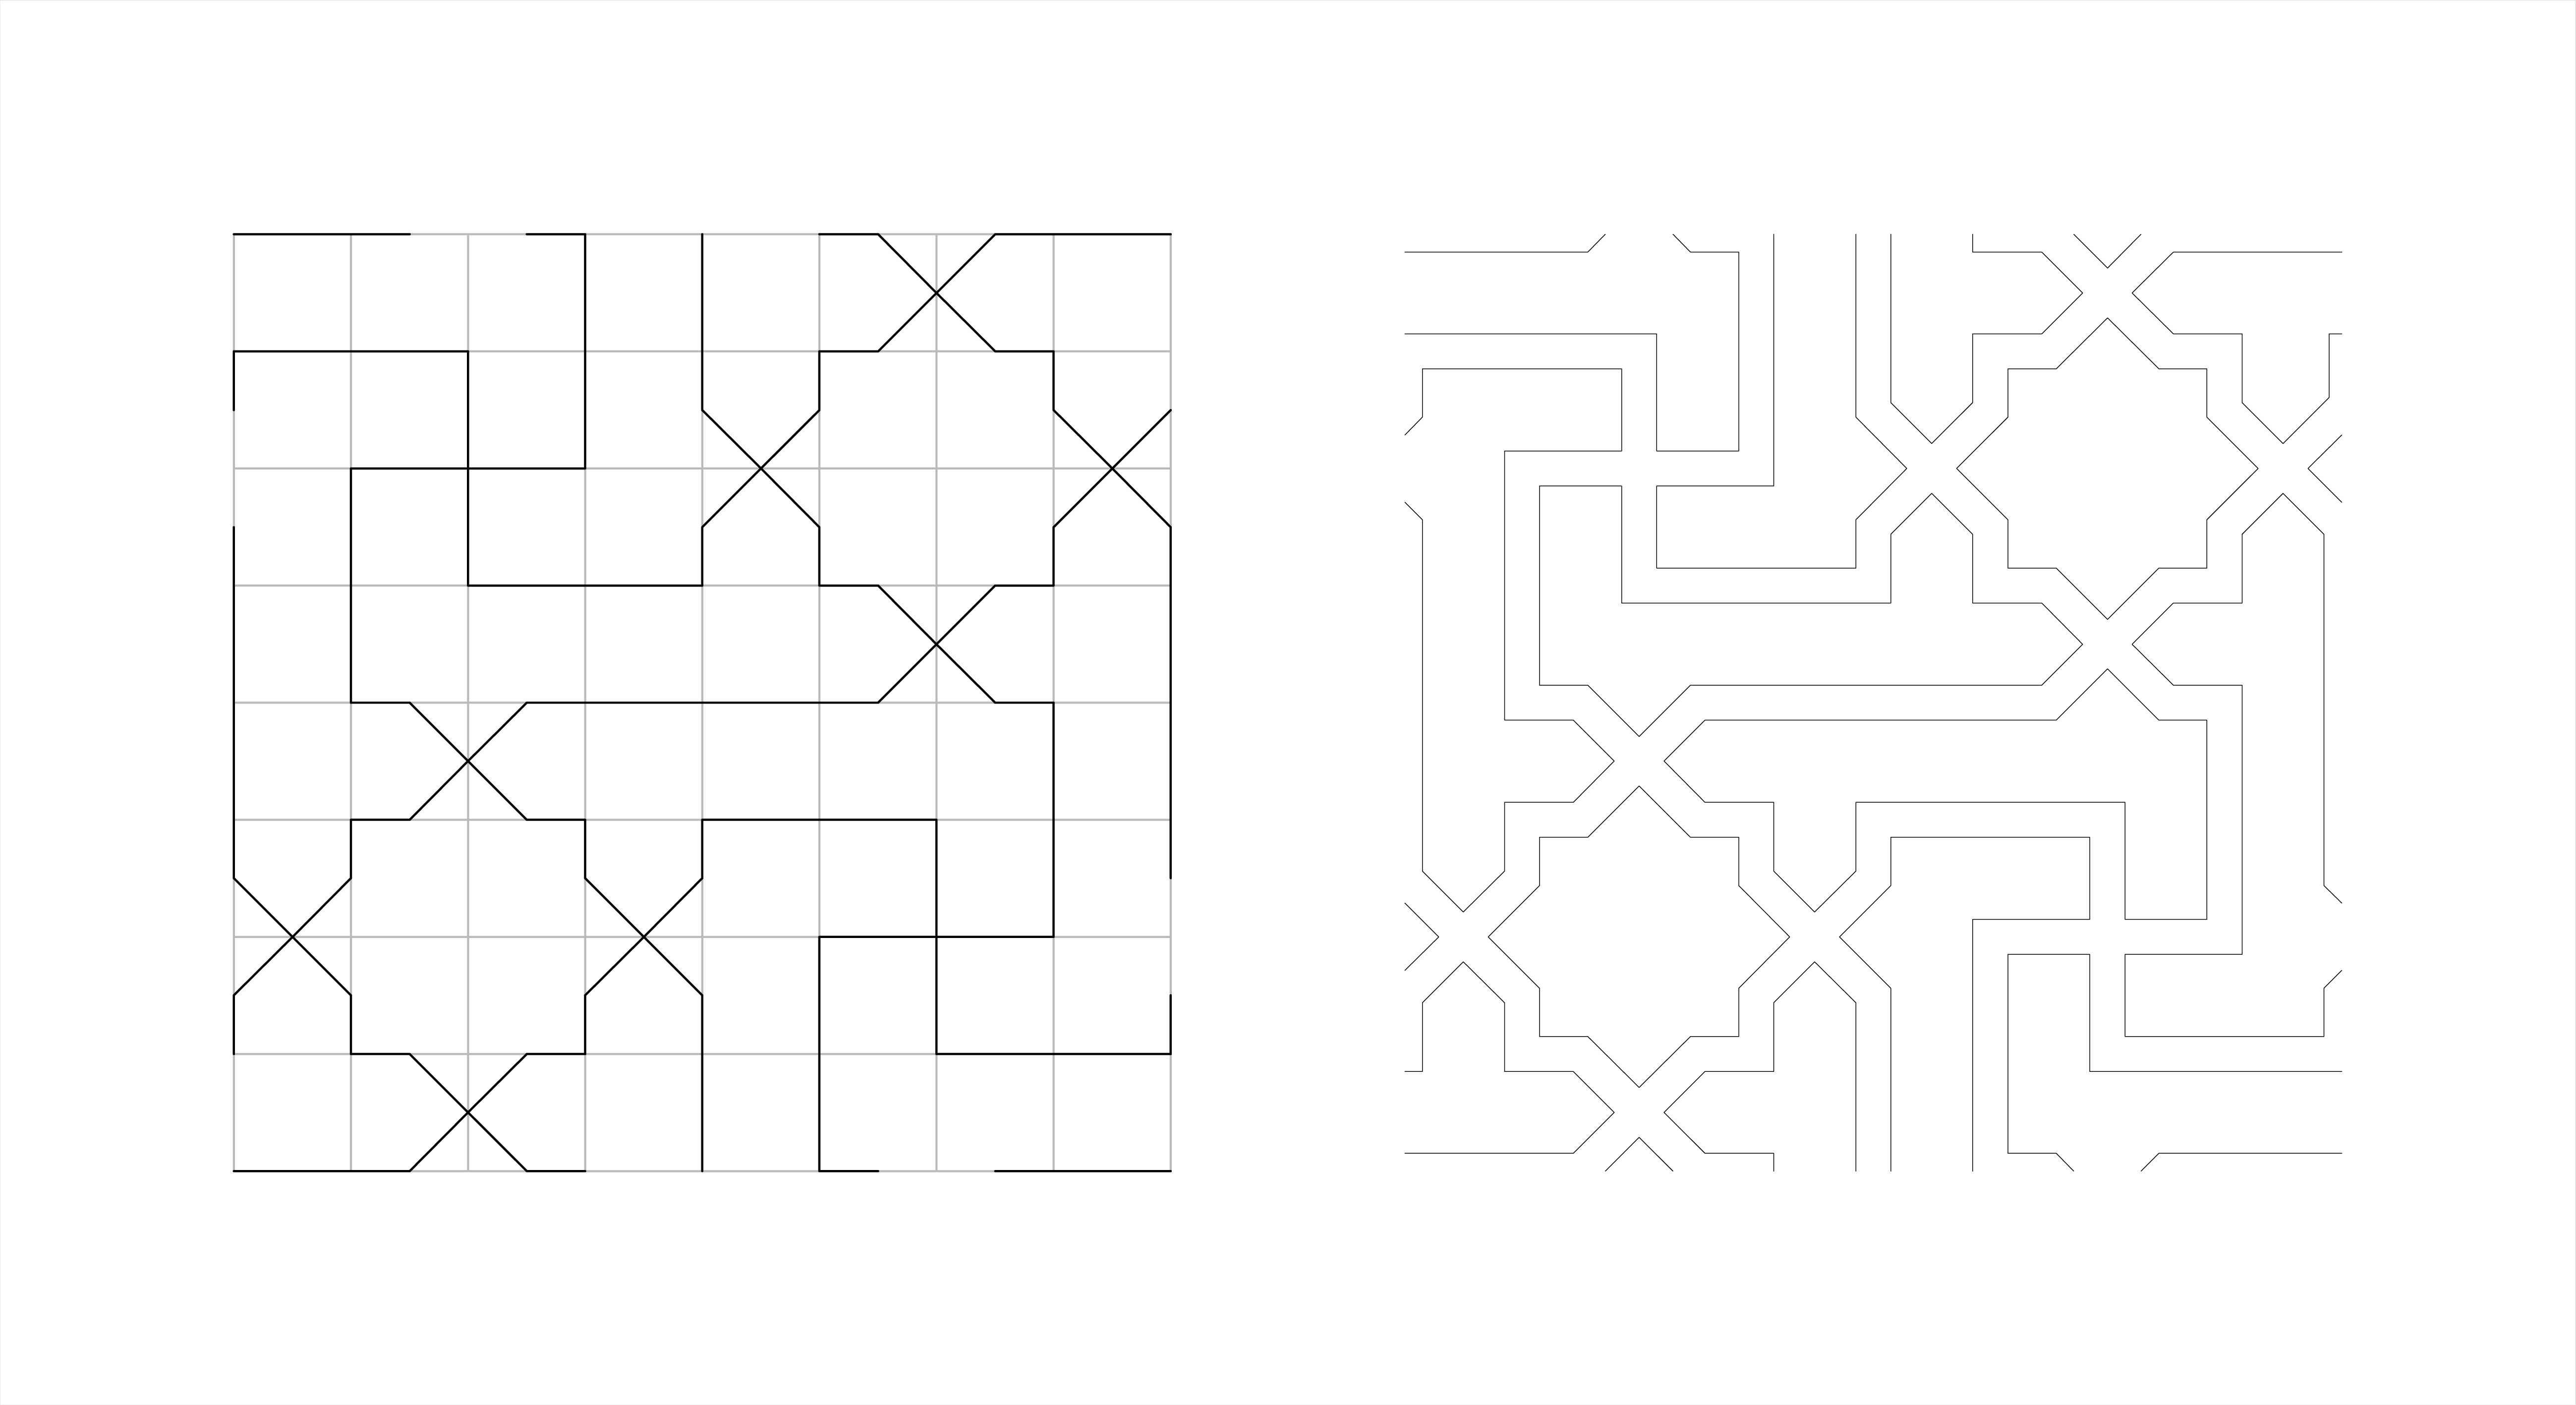 Islamic Patterns | How to become an Architect